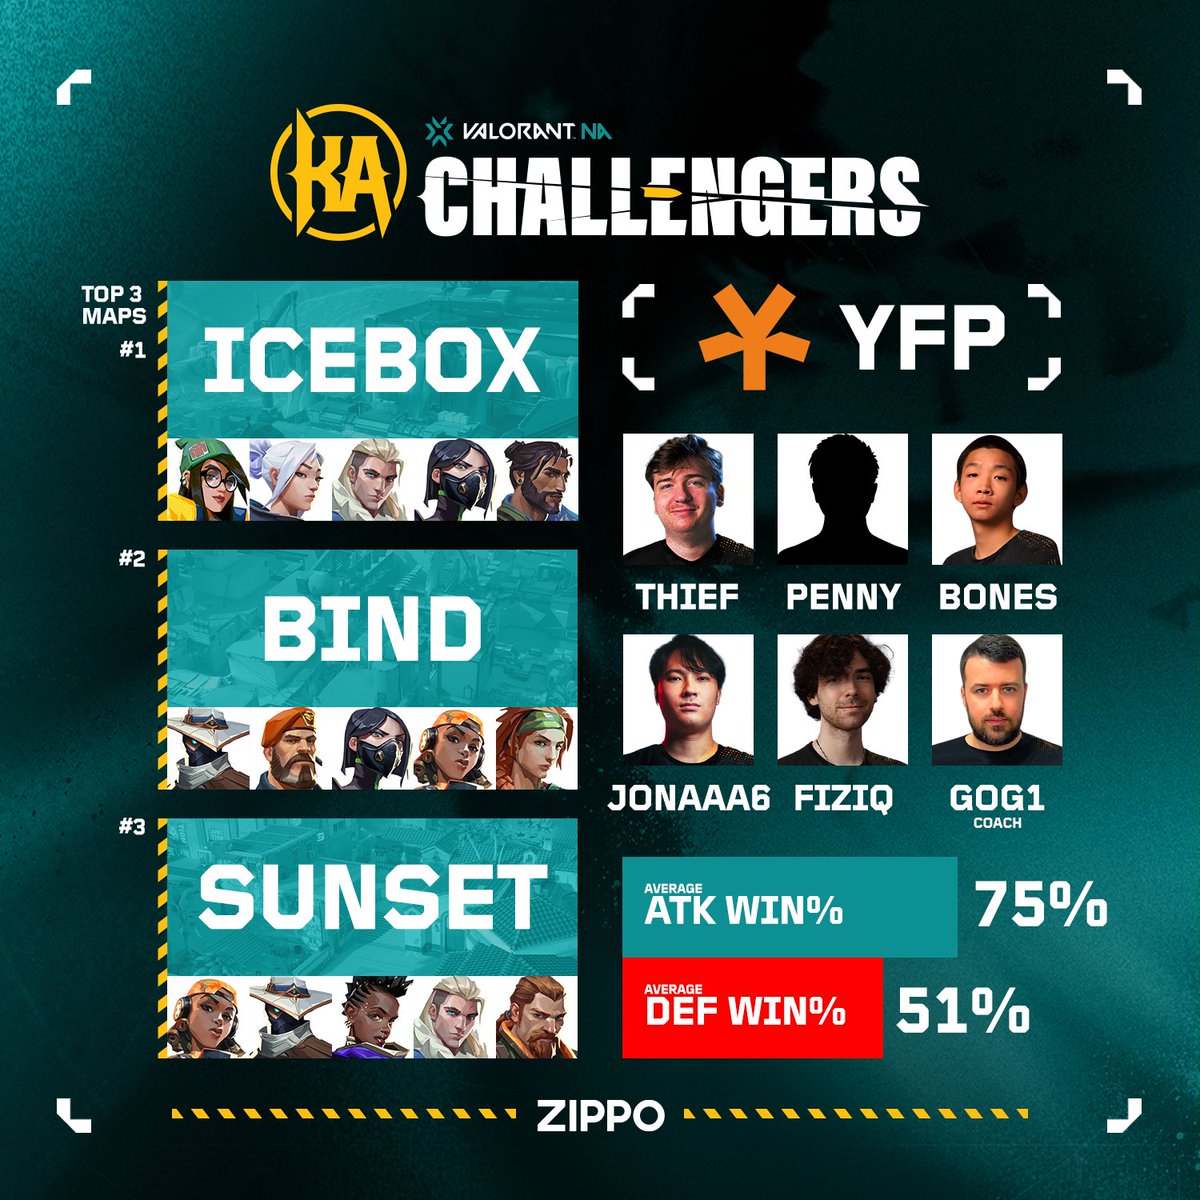 📍 From epic plays to stylish victories, @YFPGamingLive stacks up impressive stats from Open Qualifiers! 📈 Don't sleep on this squad – they're ready to make waves in the #ChallengersNA League! 🔸 @thi9f 🔸 @penny9o 🔸 @Bonesllb 🔸 @Jonaaa6_VAL 🔸 @1fiziq 🔸 @g0g1le (c)